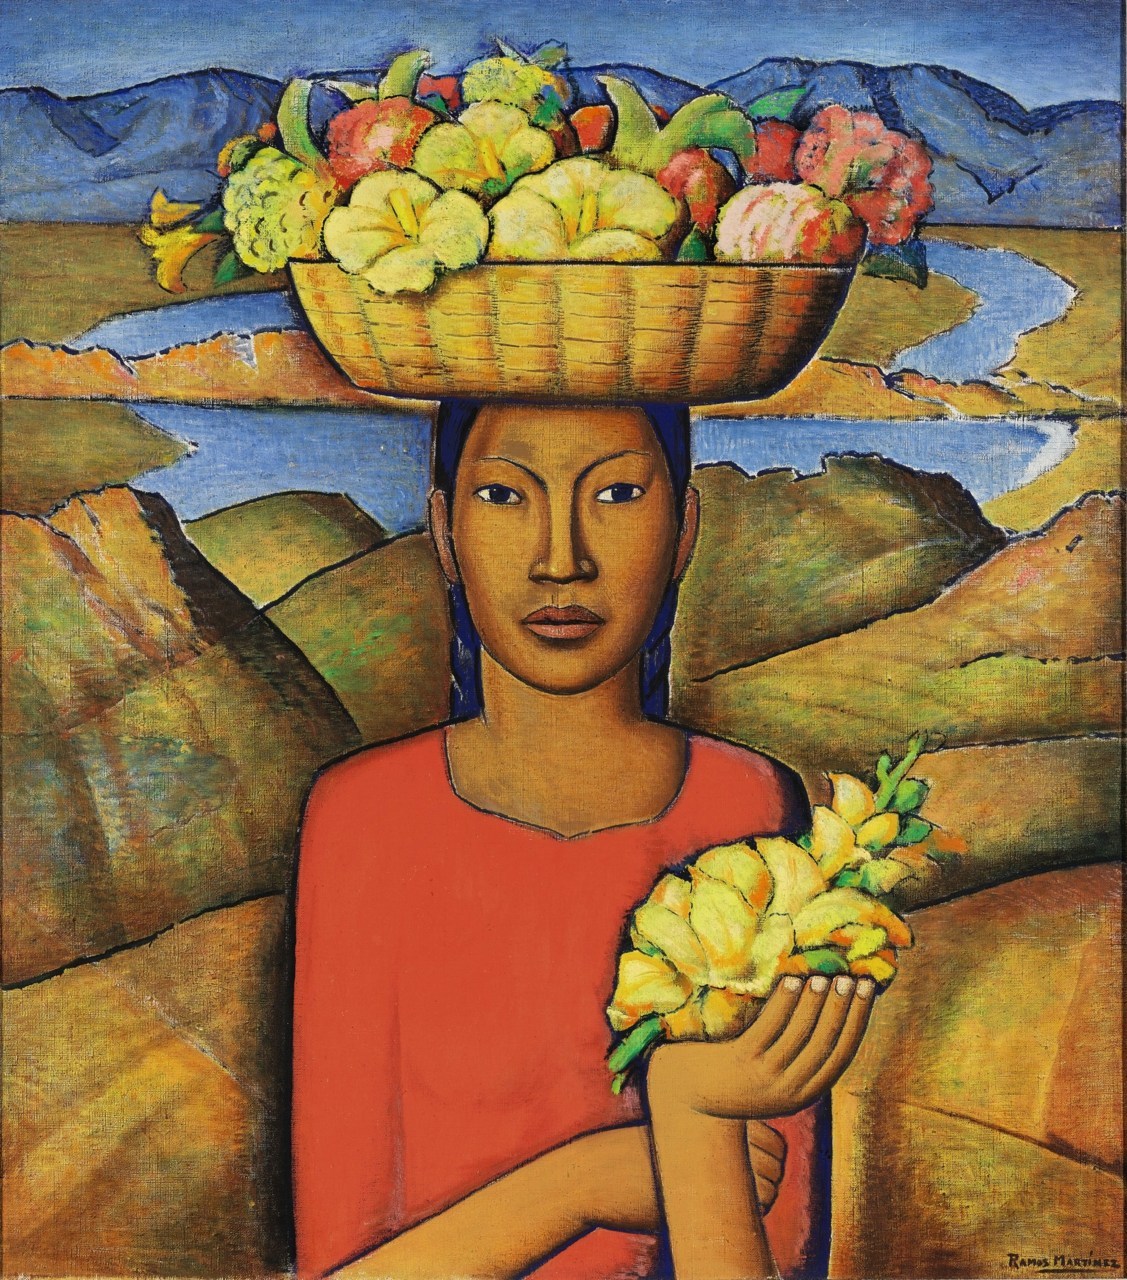 Y'all Hola back now! Ramos Martinez, La India Del Lago,1938, in Sotheby’s Latin American art sale next week. The Latin American art market is booming–but nonwhite audiences in museums hover at 9 percent. Read what museums like the Denver Art Museum...